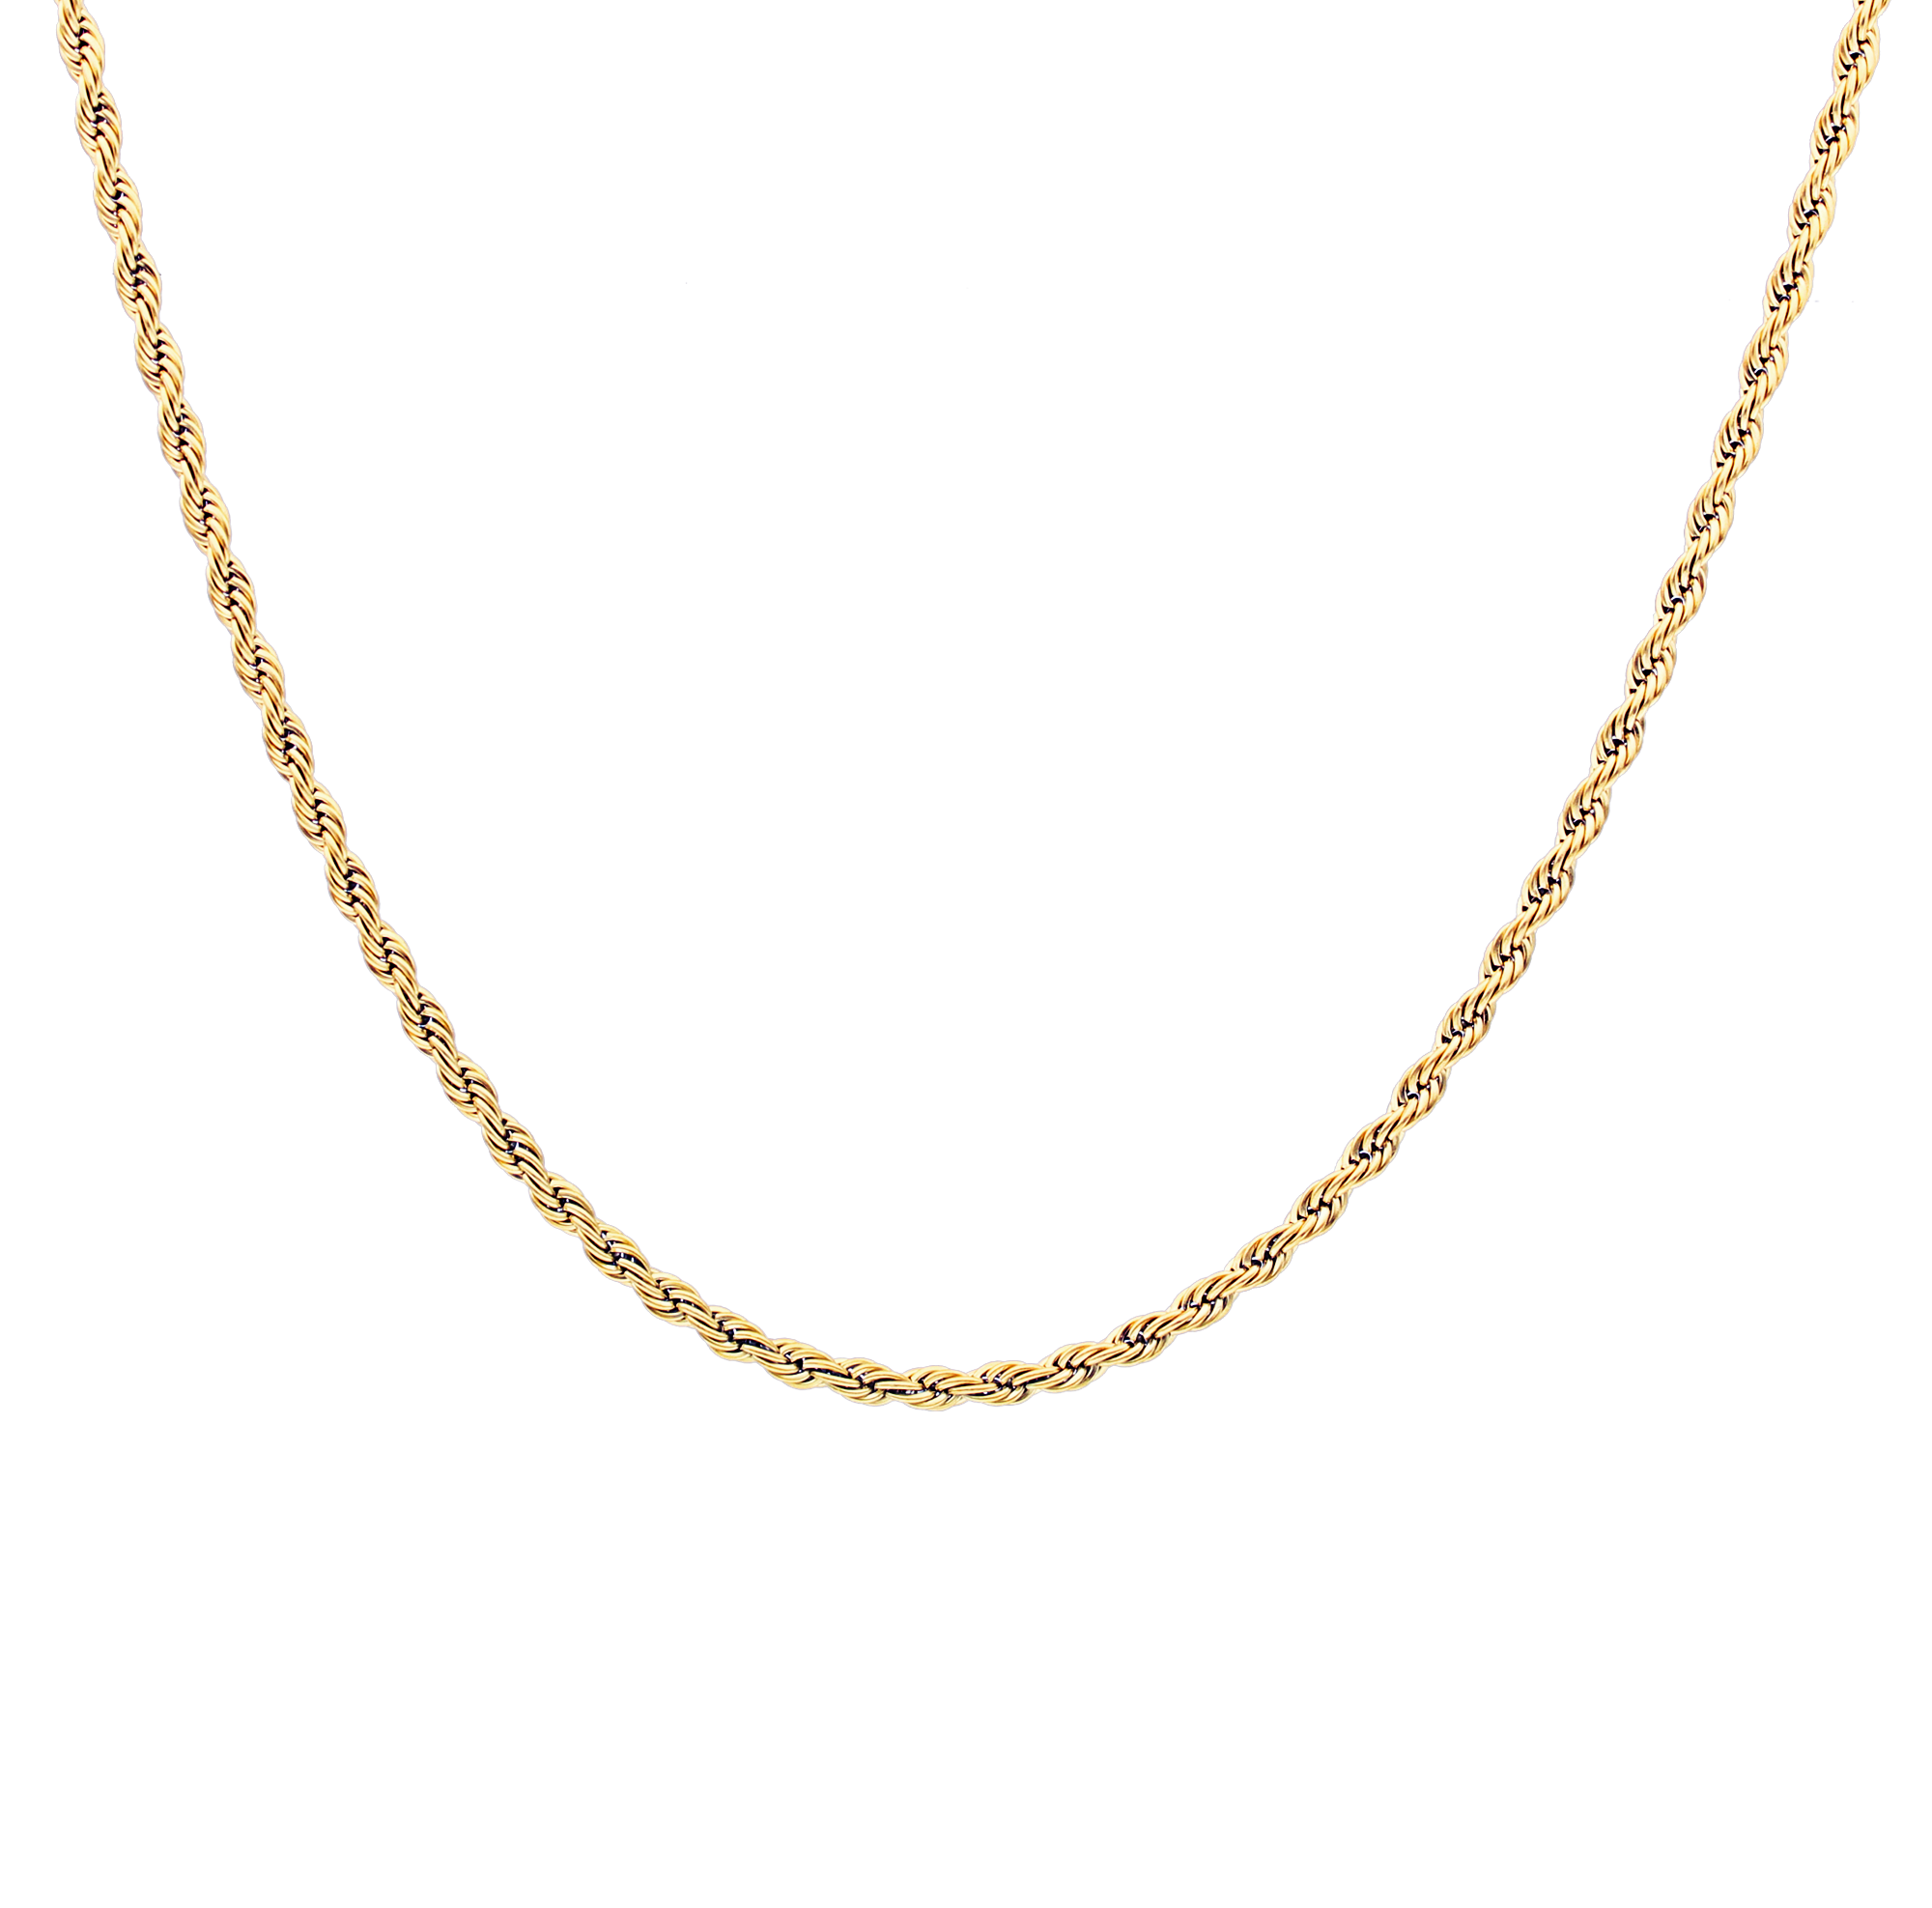 Donna women's necklace by Five Jwlry, crafted from a bold 3.5mm French rope twisted chain in gold-colored, water-resistant 316L stainless steel. Available in sizes 45cm and 50cm. Hypoallergenic with a 2-year warranty.